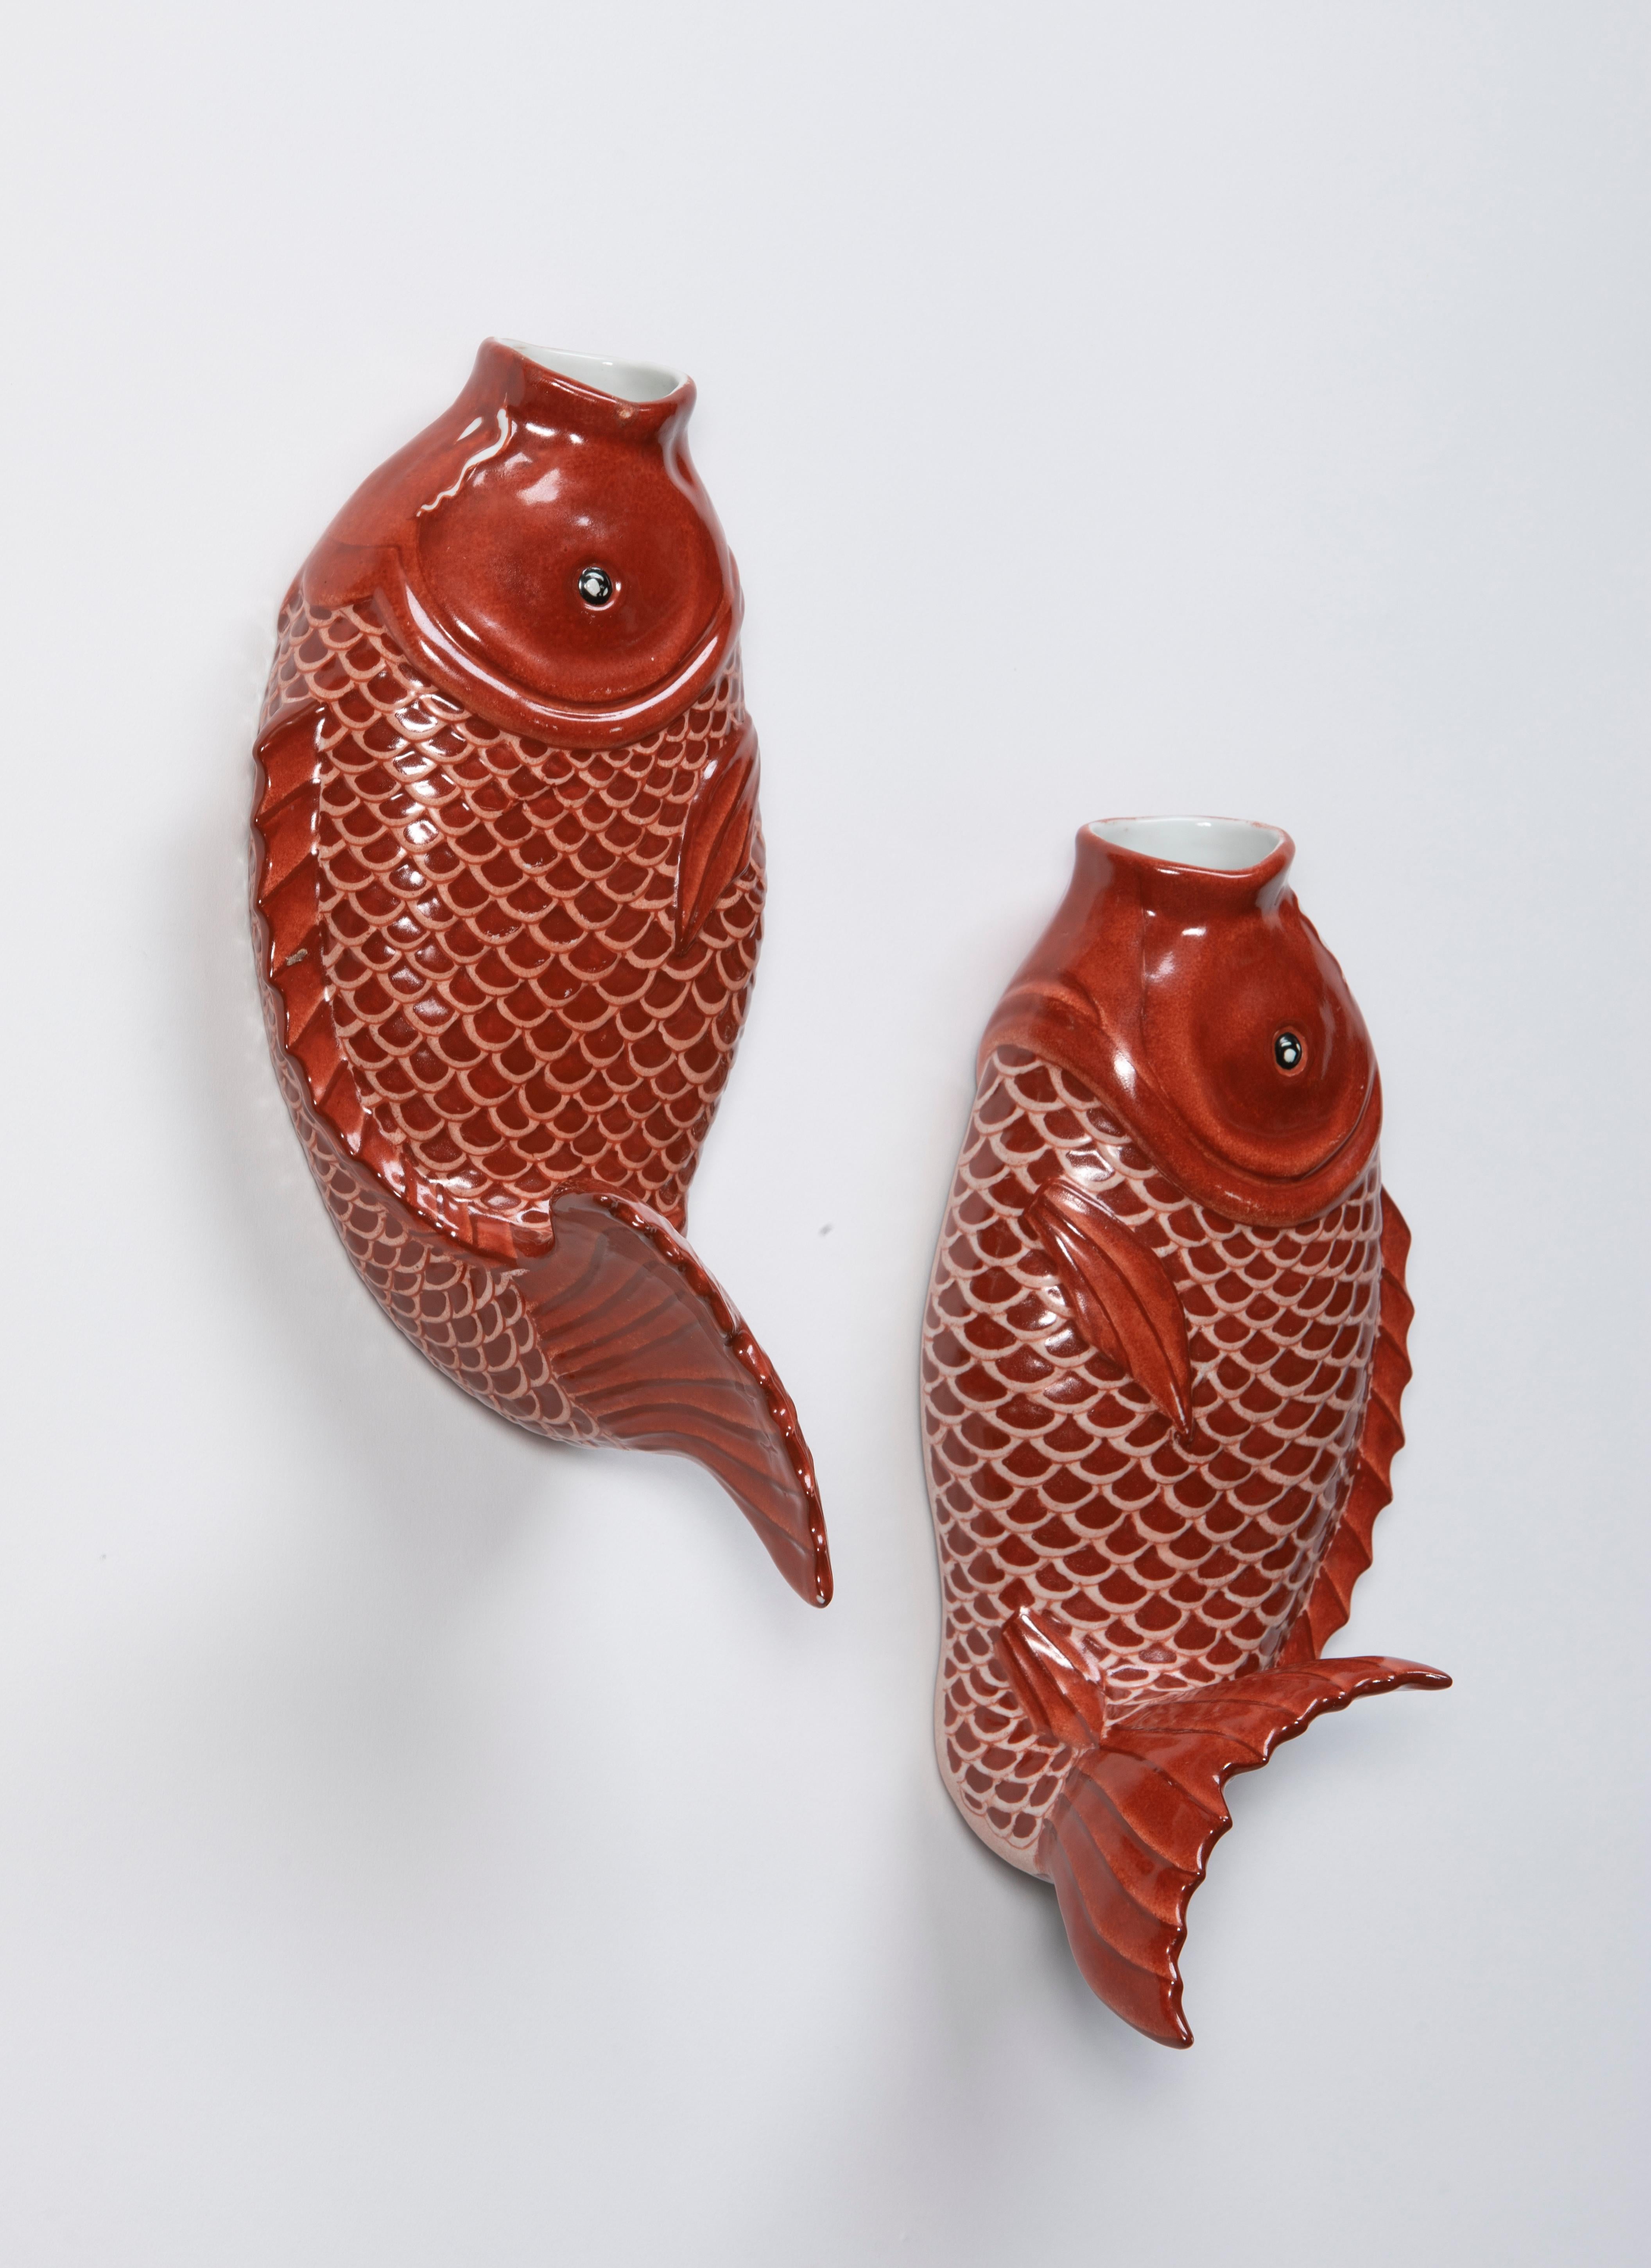 Pair of Decorative Koi Wall Pockets In Good Condition For Sale In Santa Cruz, CA